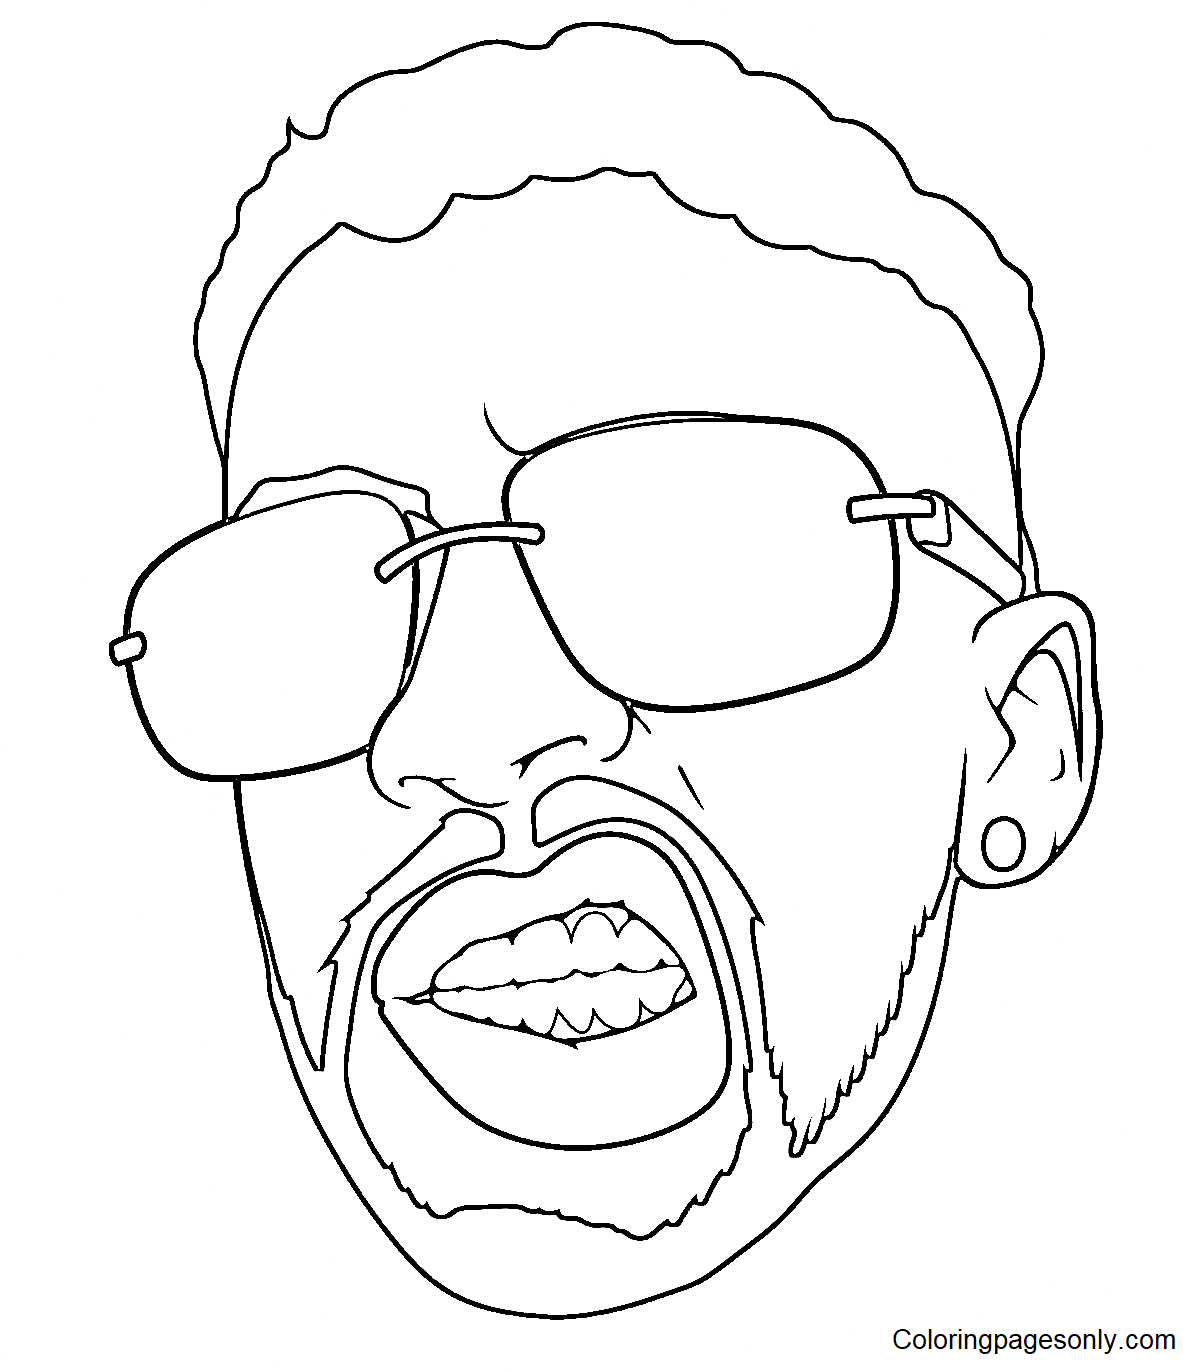 Bad Bunny with Sunglasses Coloring Page